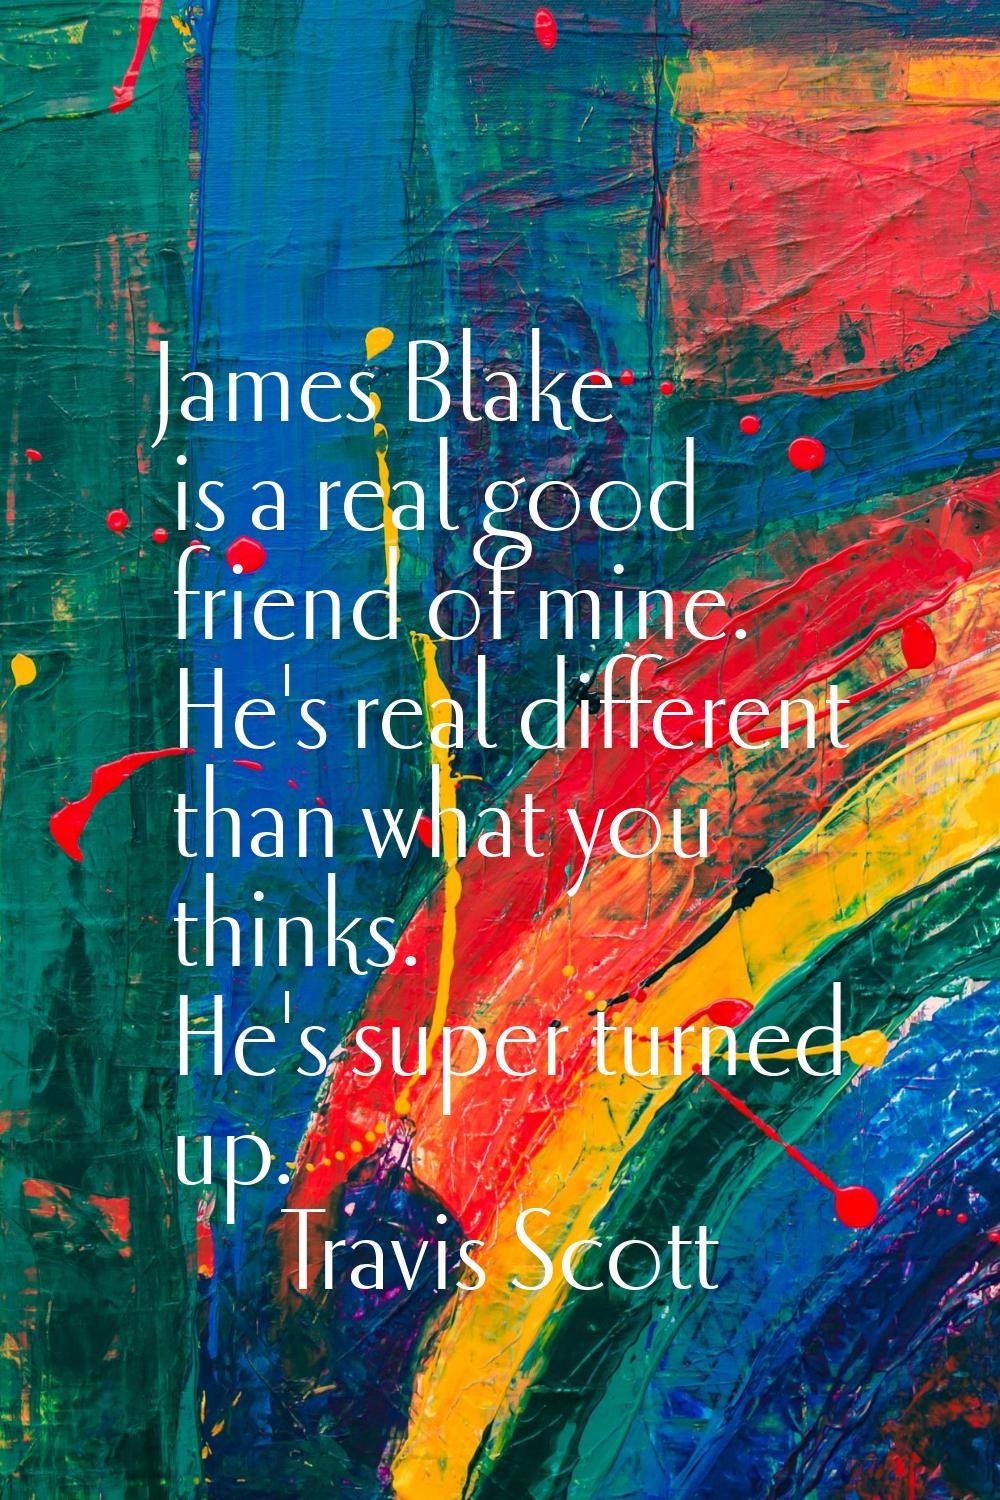 James Blake is a real good friend of mine. He's real different than what you thinks. He's super tur